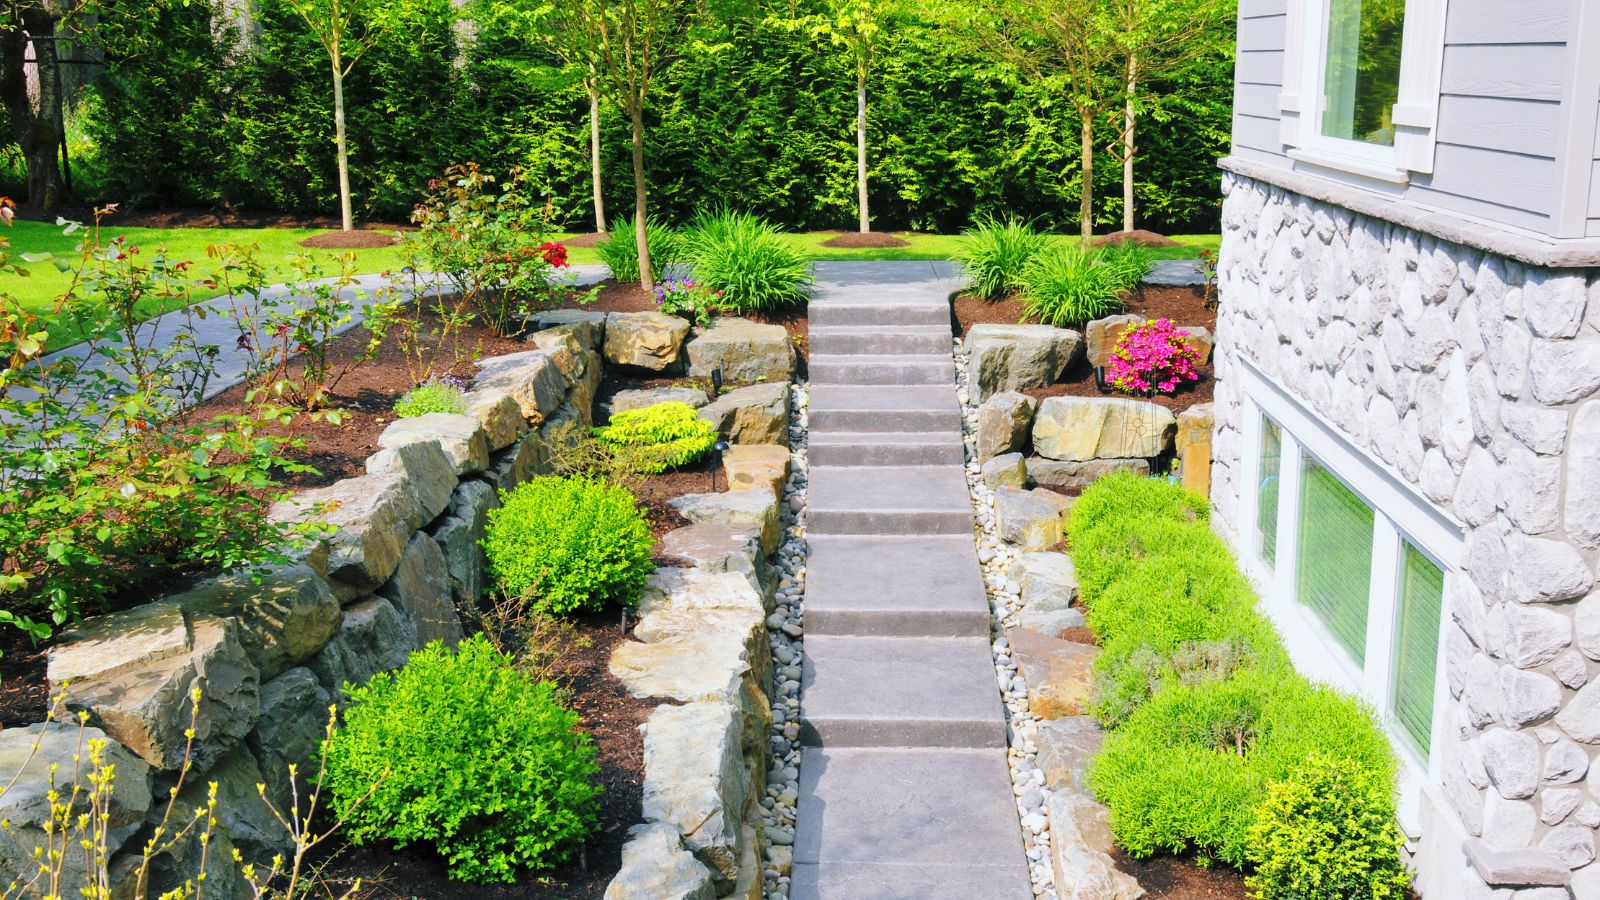 How can landscaping improve the aesthetic appeal of my home - bighomeprojects.com